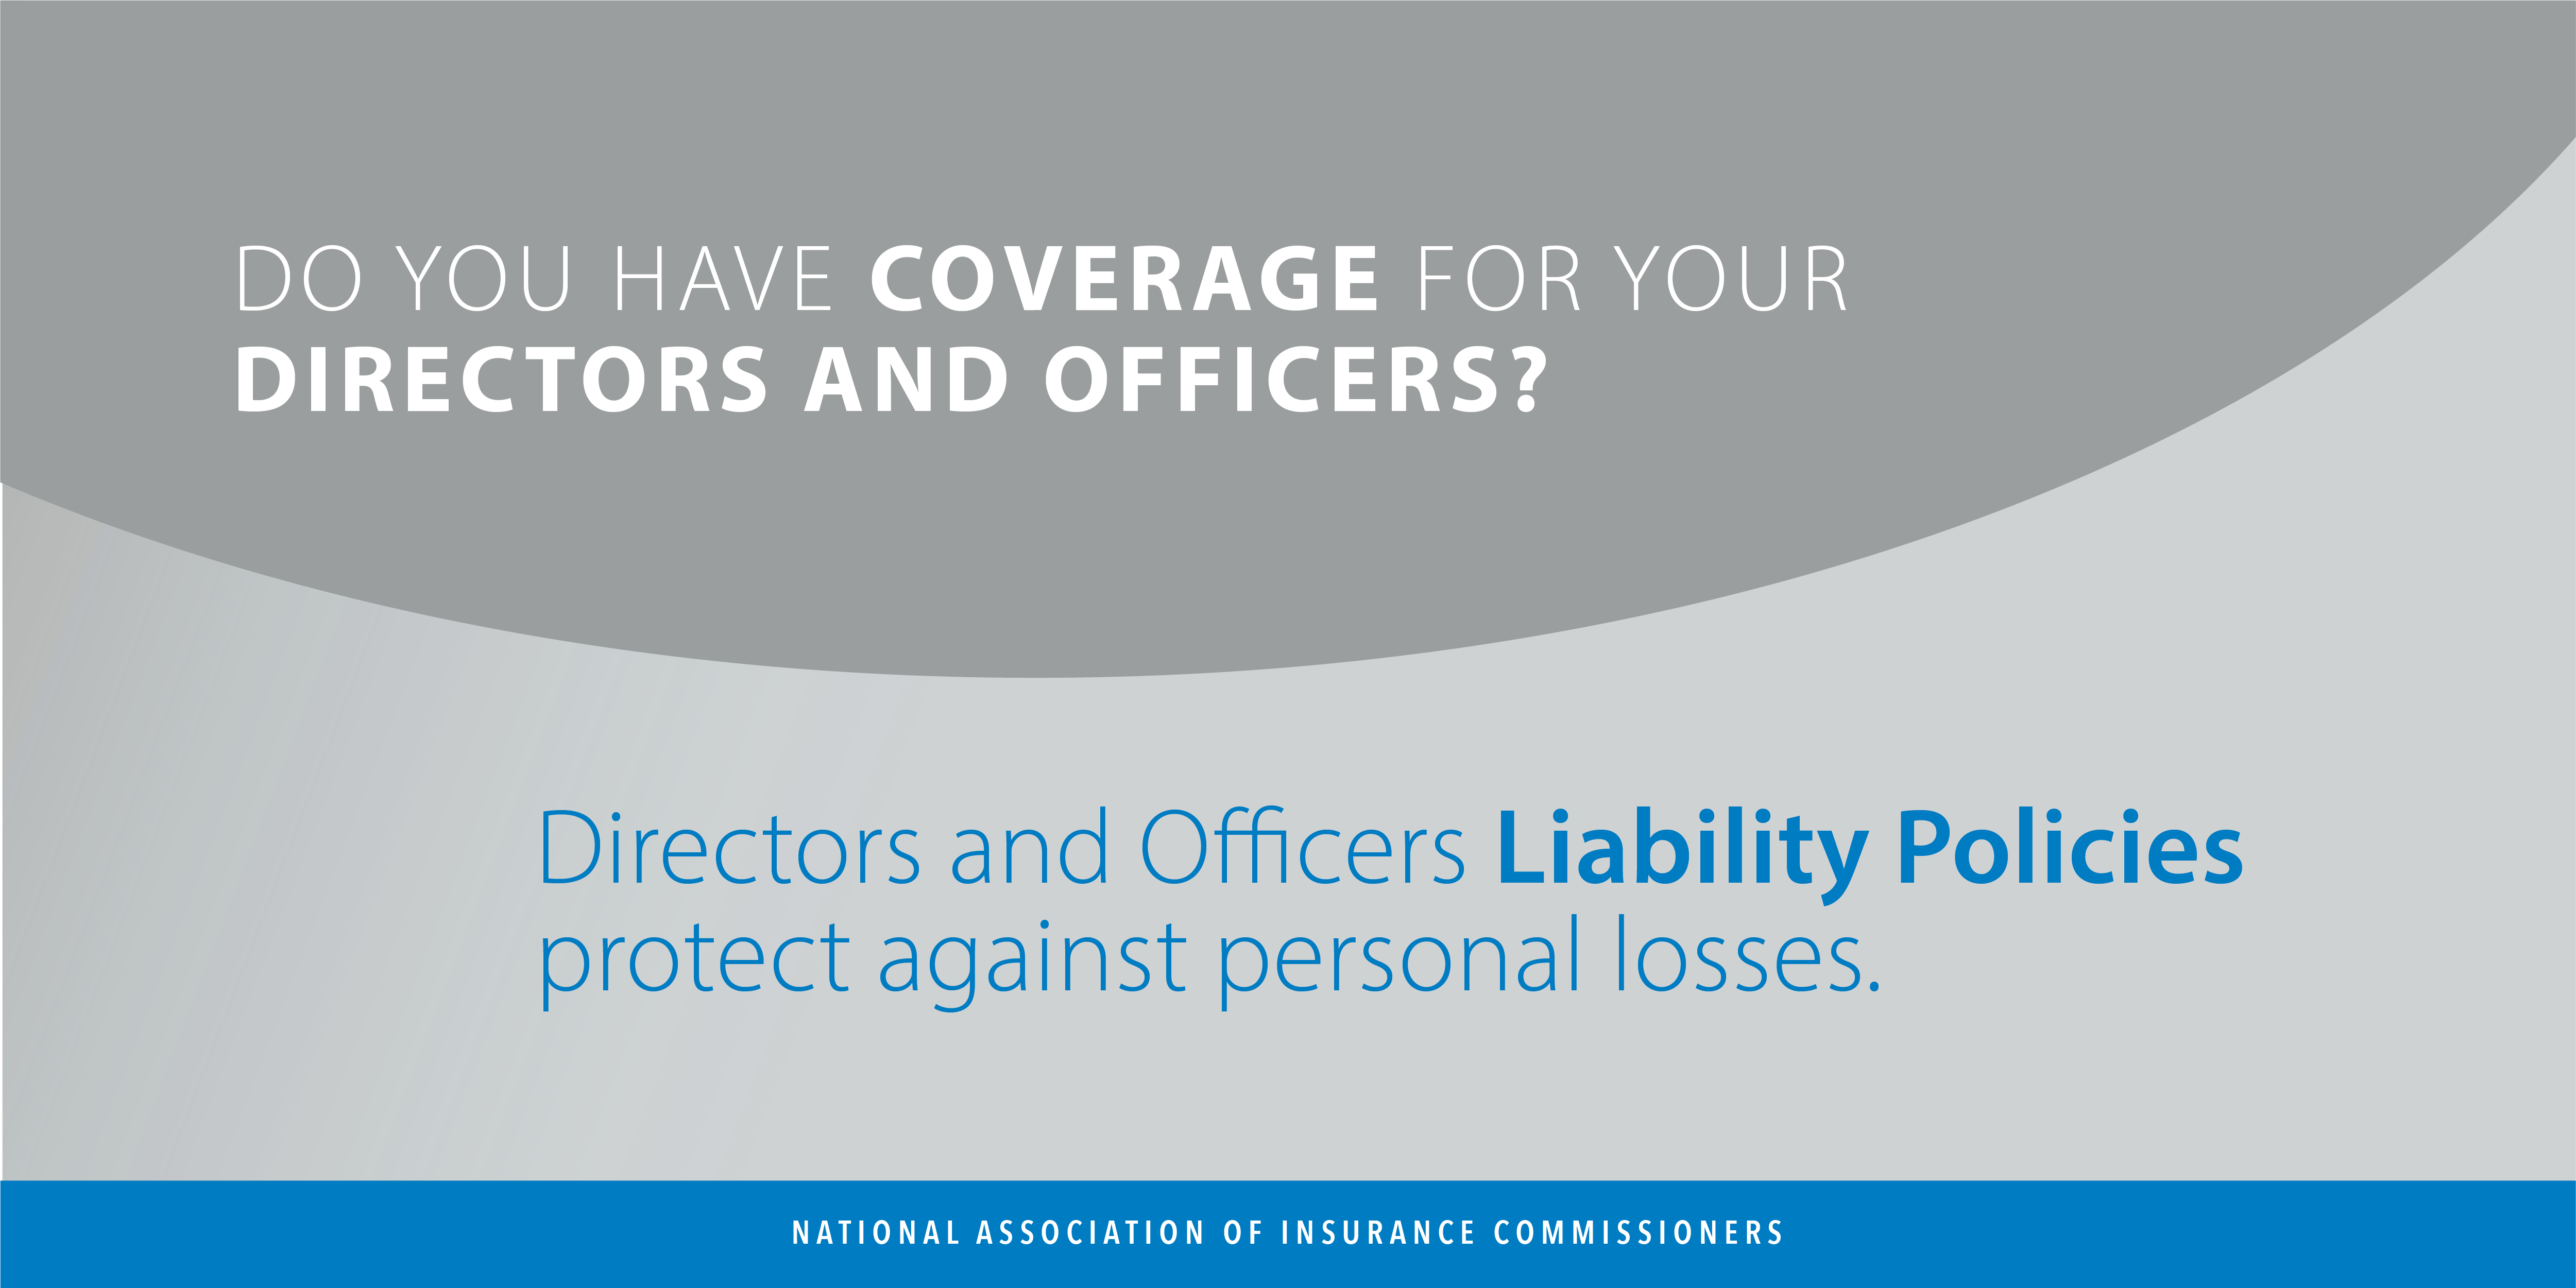 Do you have Coverage for your Directors or Officers? Directors and Officers Liability policies protect against personal losses.